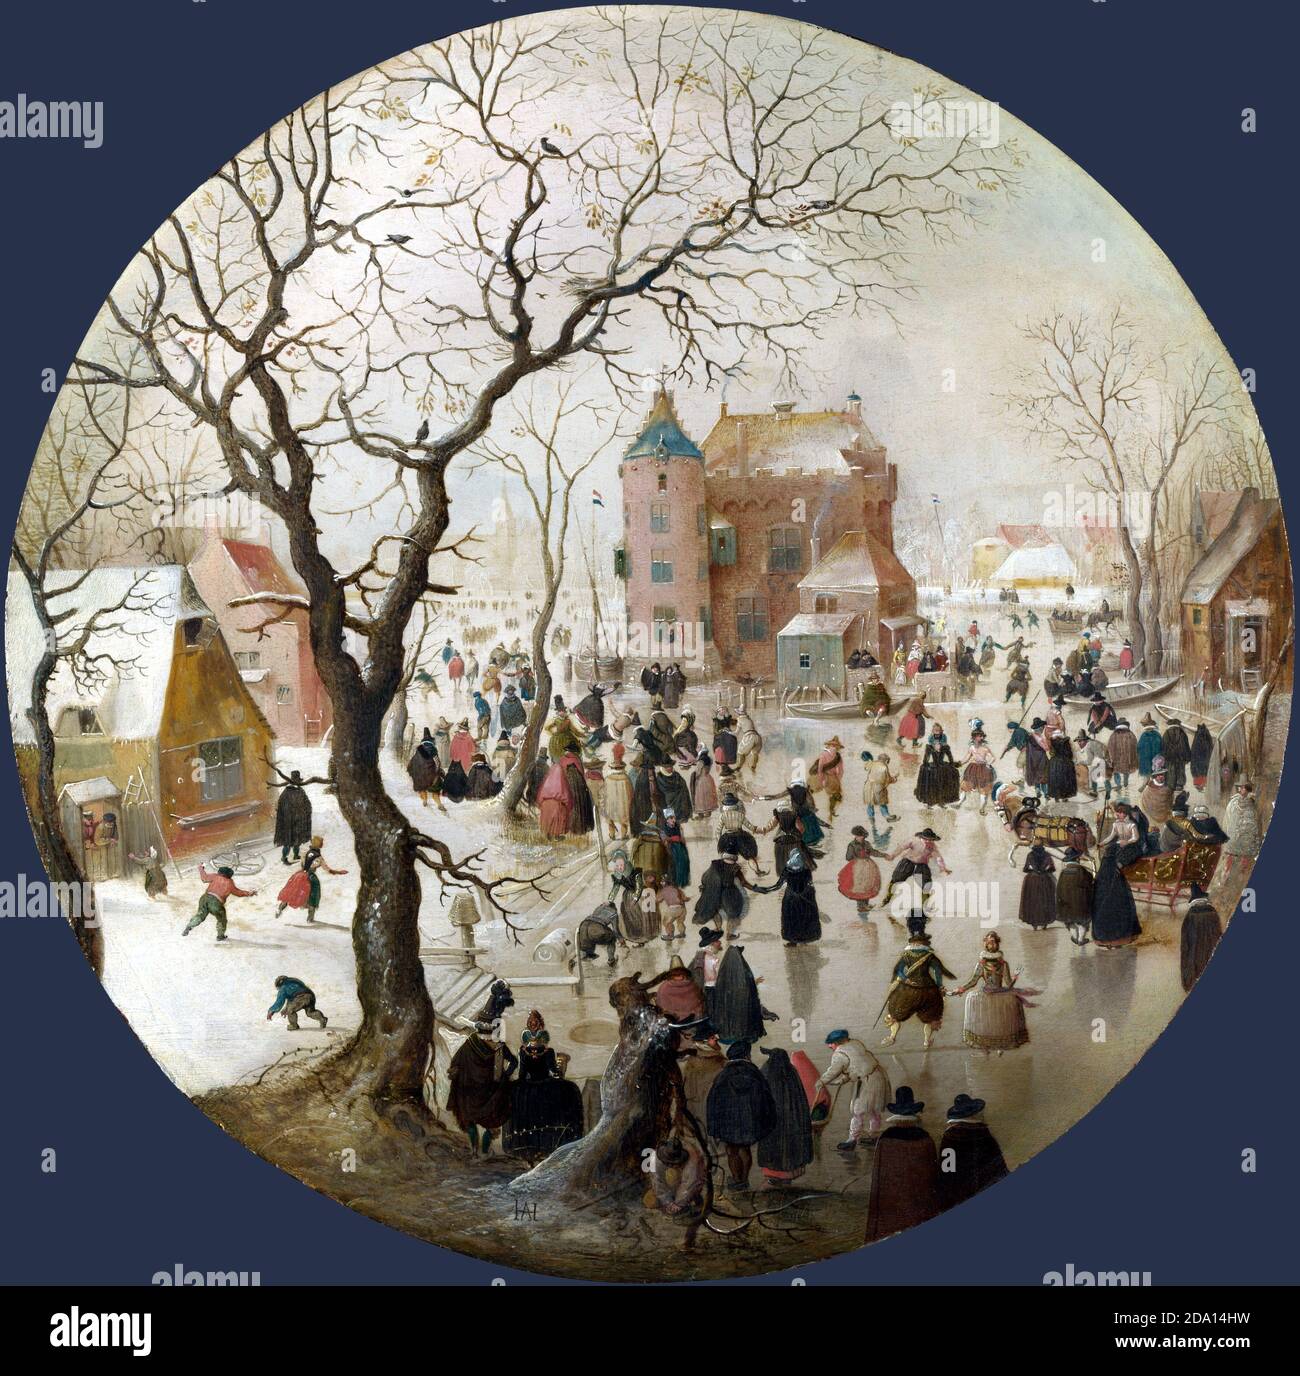 AVERCAMP, Hendrick - A Winter Scene with Skaters near a Castle, Old European oil painting, classic style Stock Photo